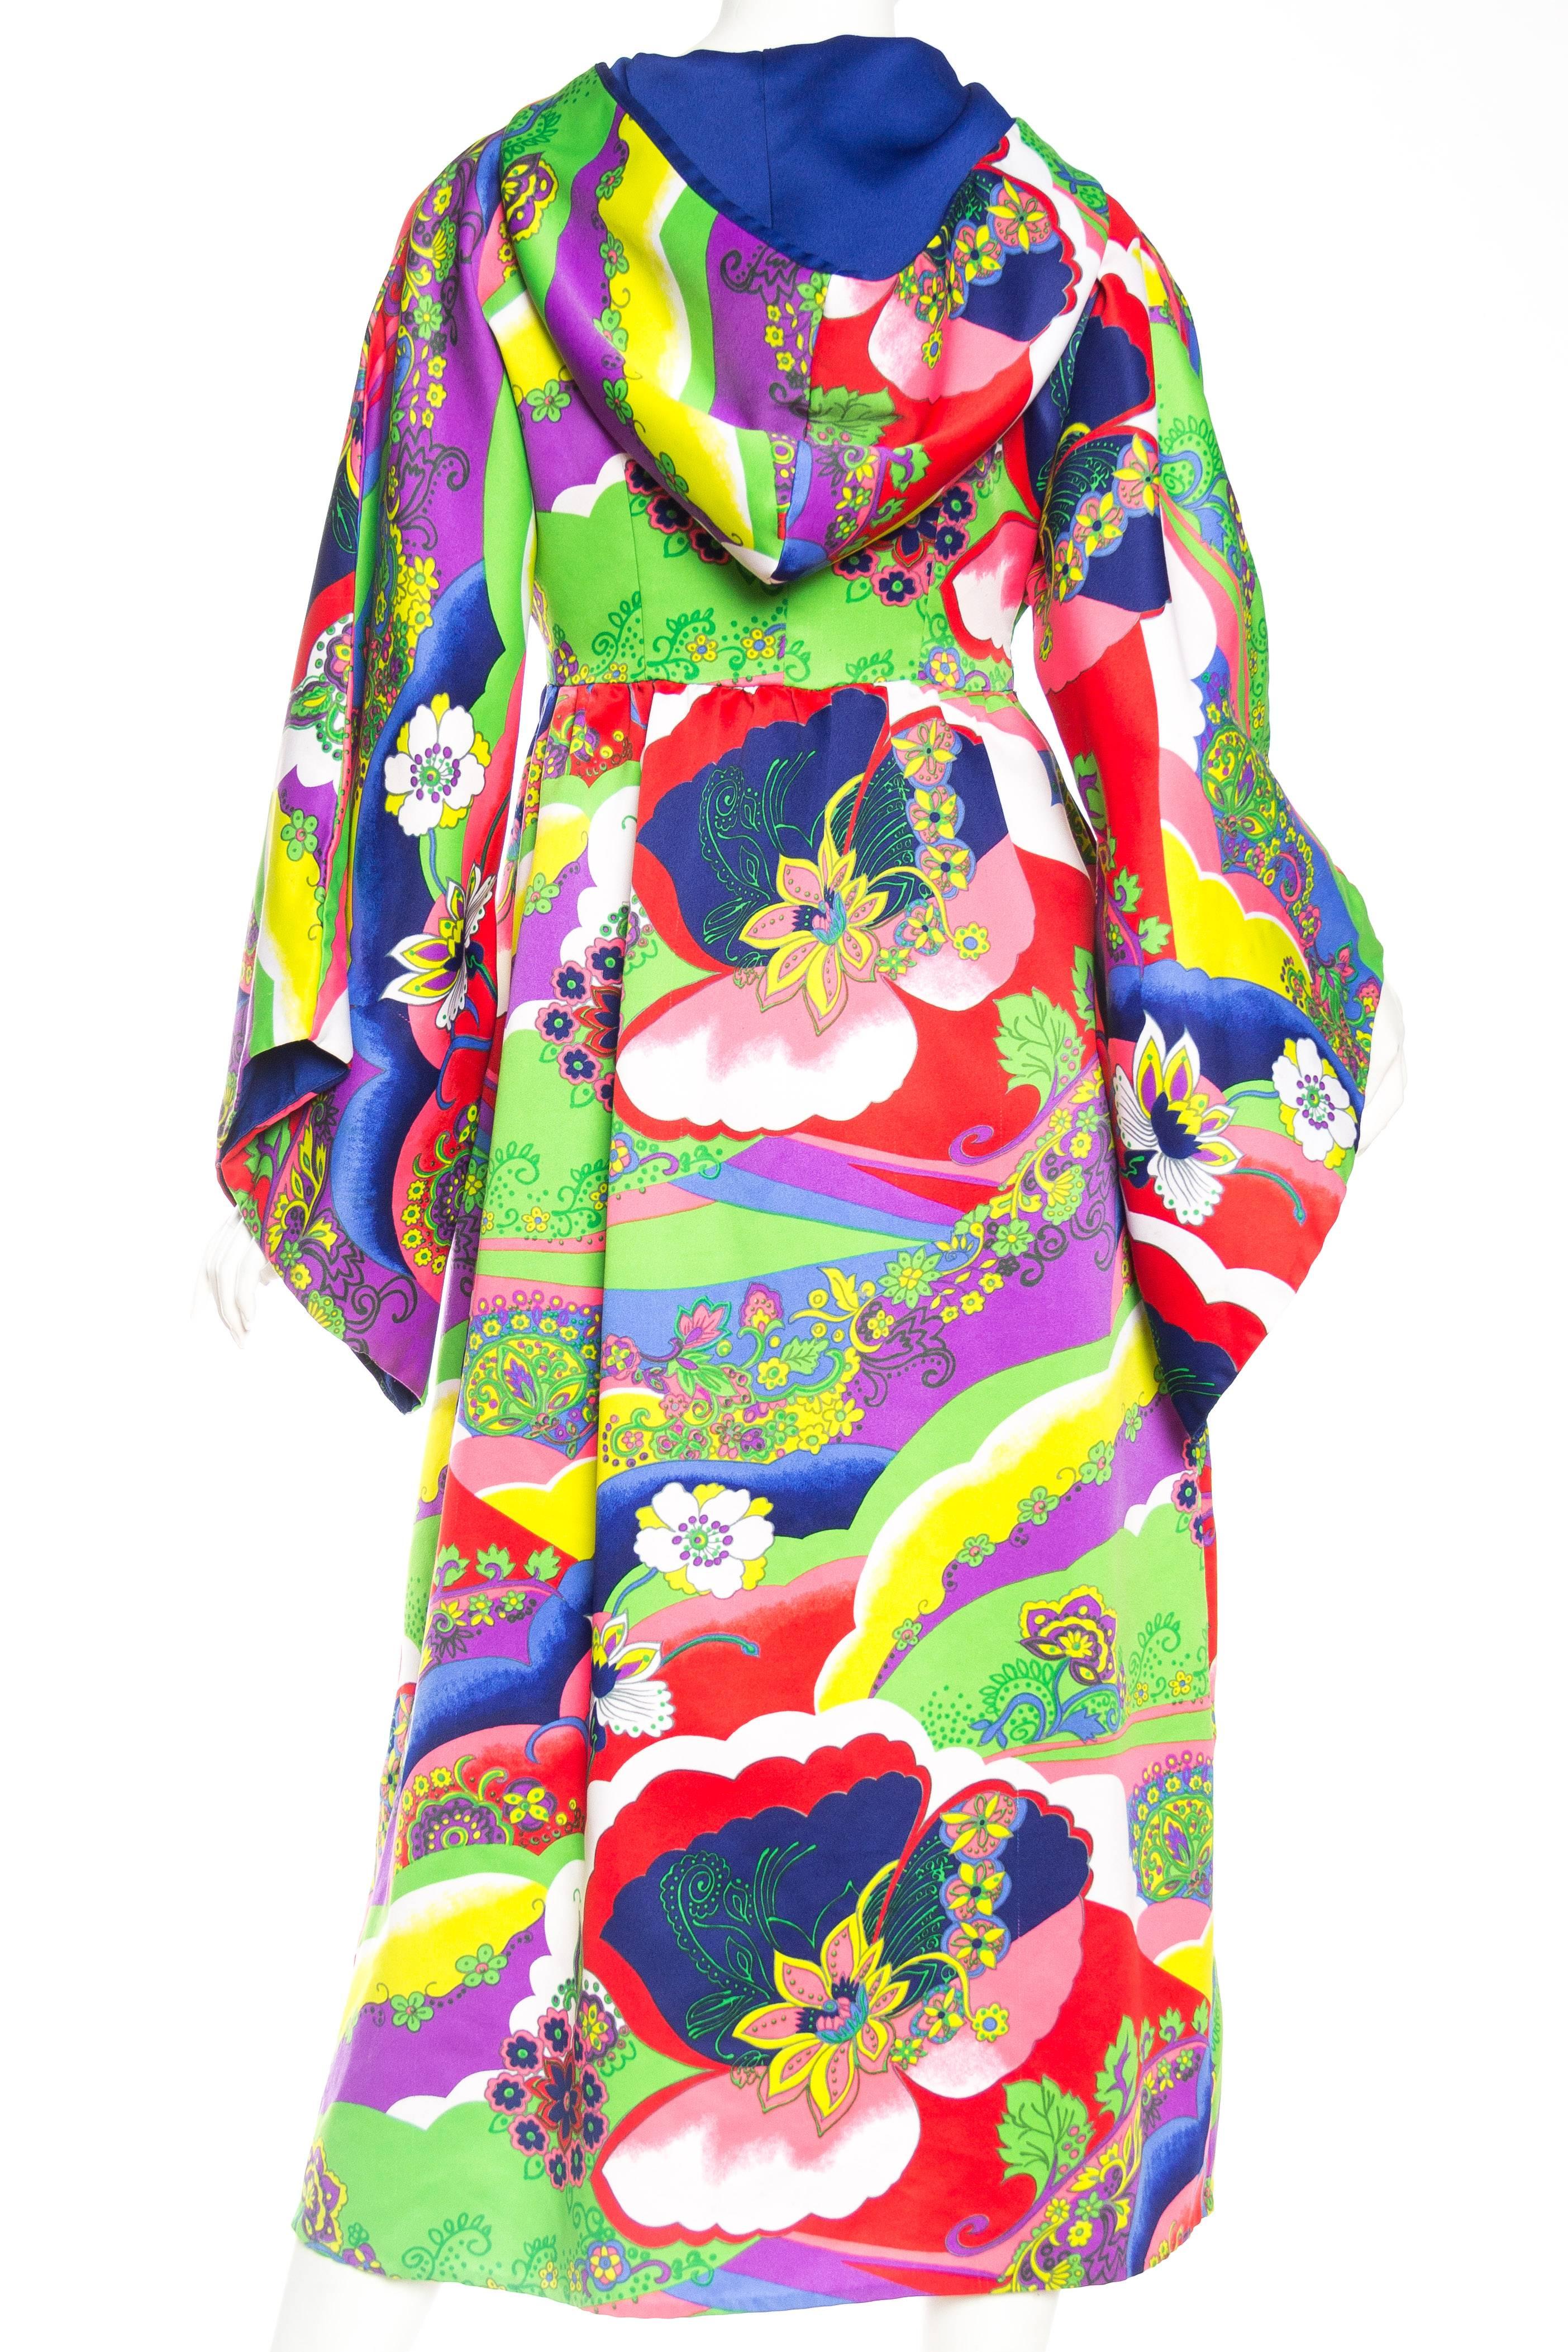 Women's 1970S Multicolor Psychedelic Polyester Empire Waist Bell Sleeve Hooded Dress Wi